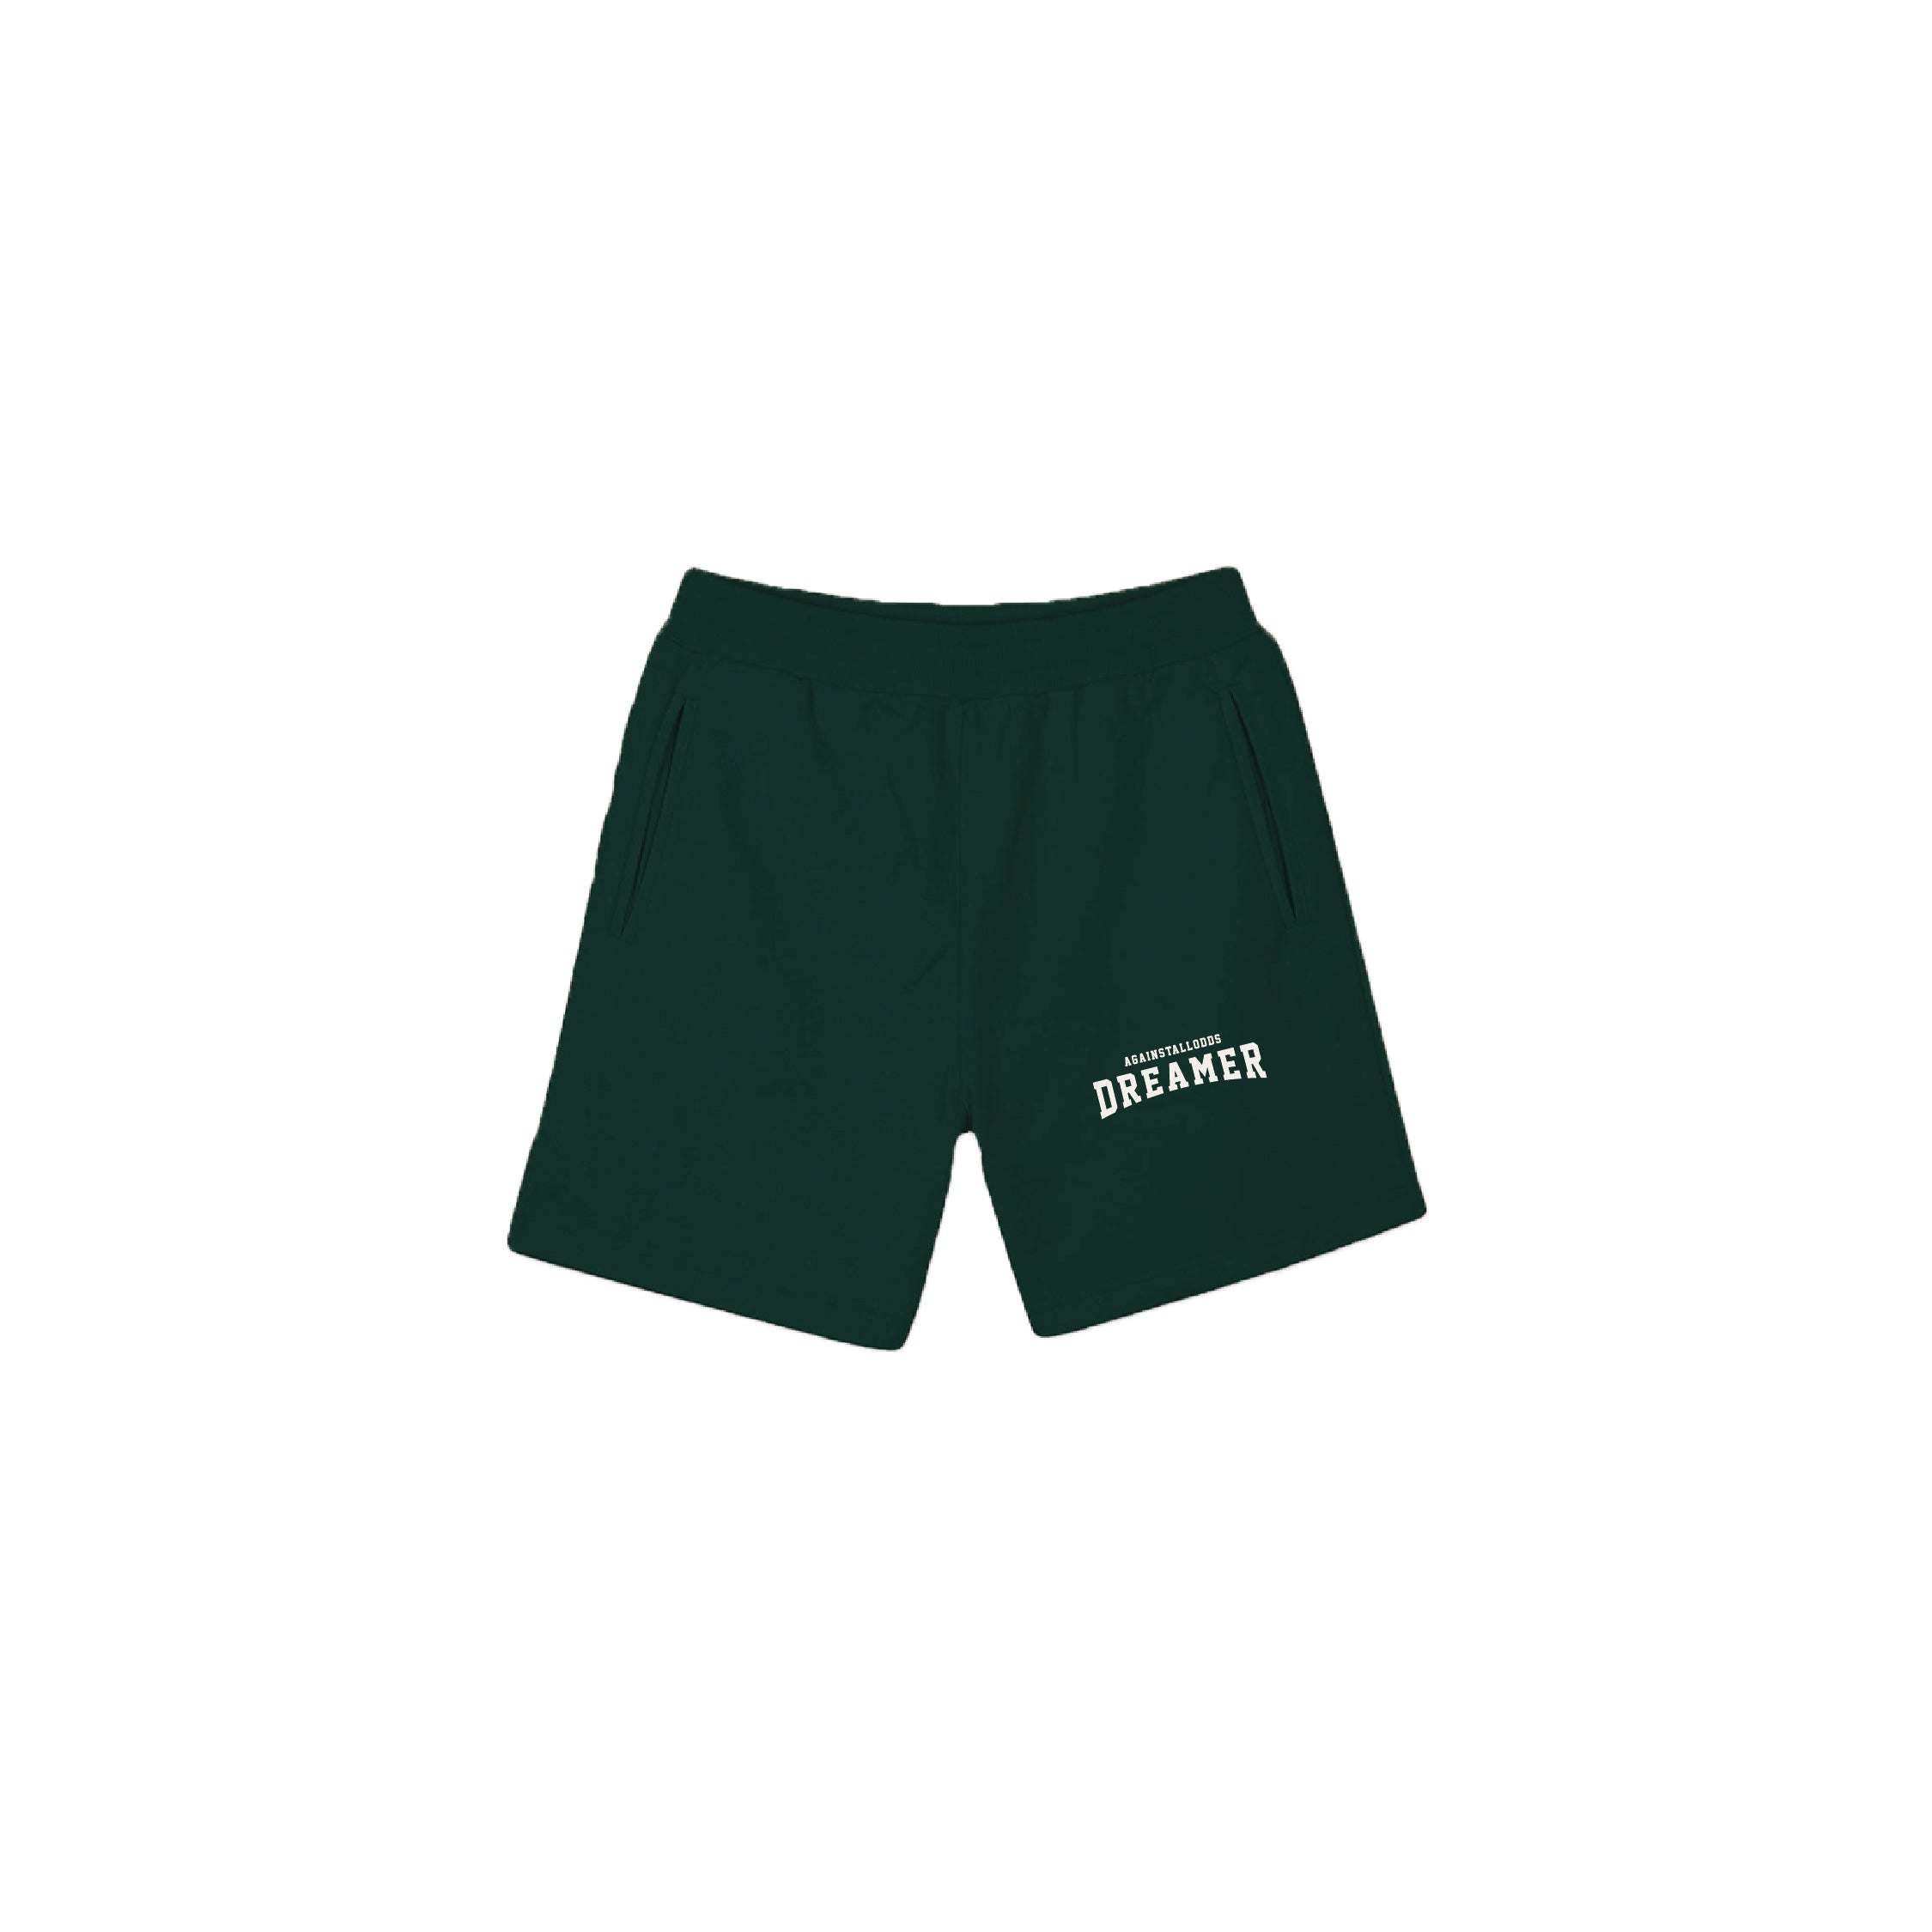 ESTATE OF MIND FRENCH TERRY SHORTS - DREAMER - WILD GREEN